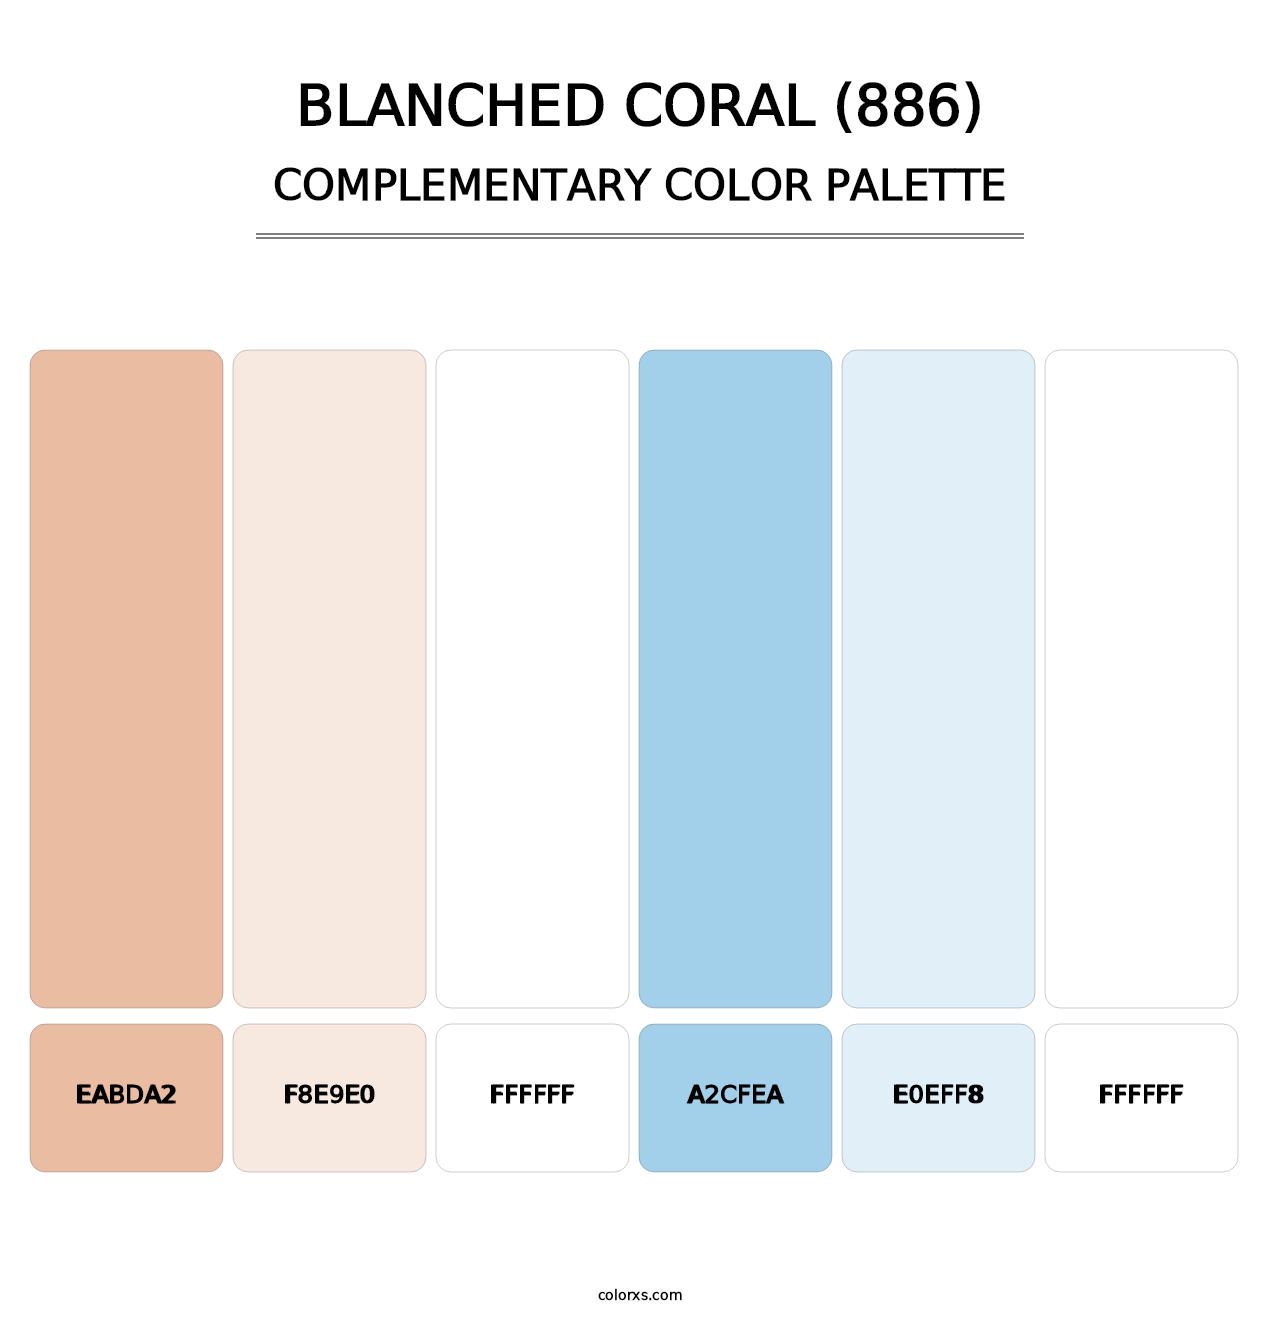 Blanched Coral (886) - Complementary Color Palette